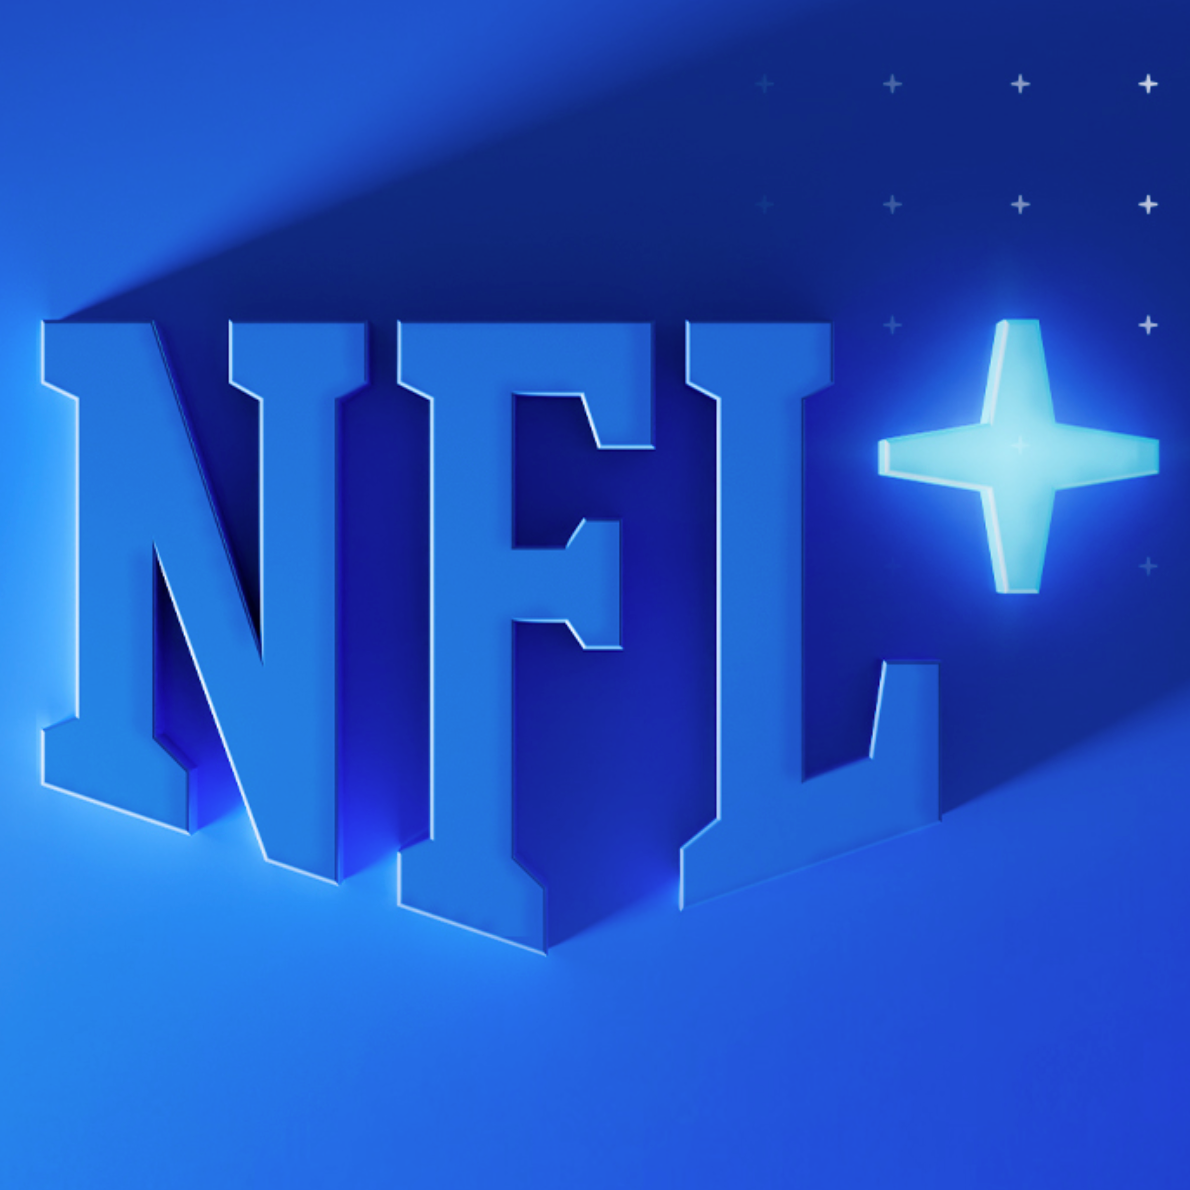 How to Watch Thursday Night Football: 2023 Schedule, NFL Live Stream and  More